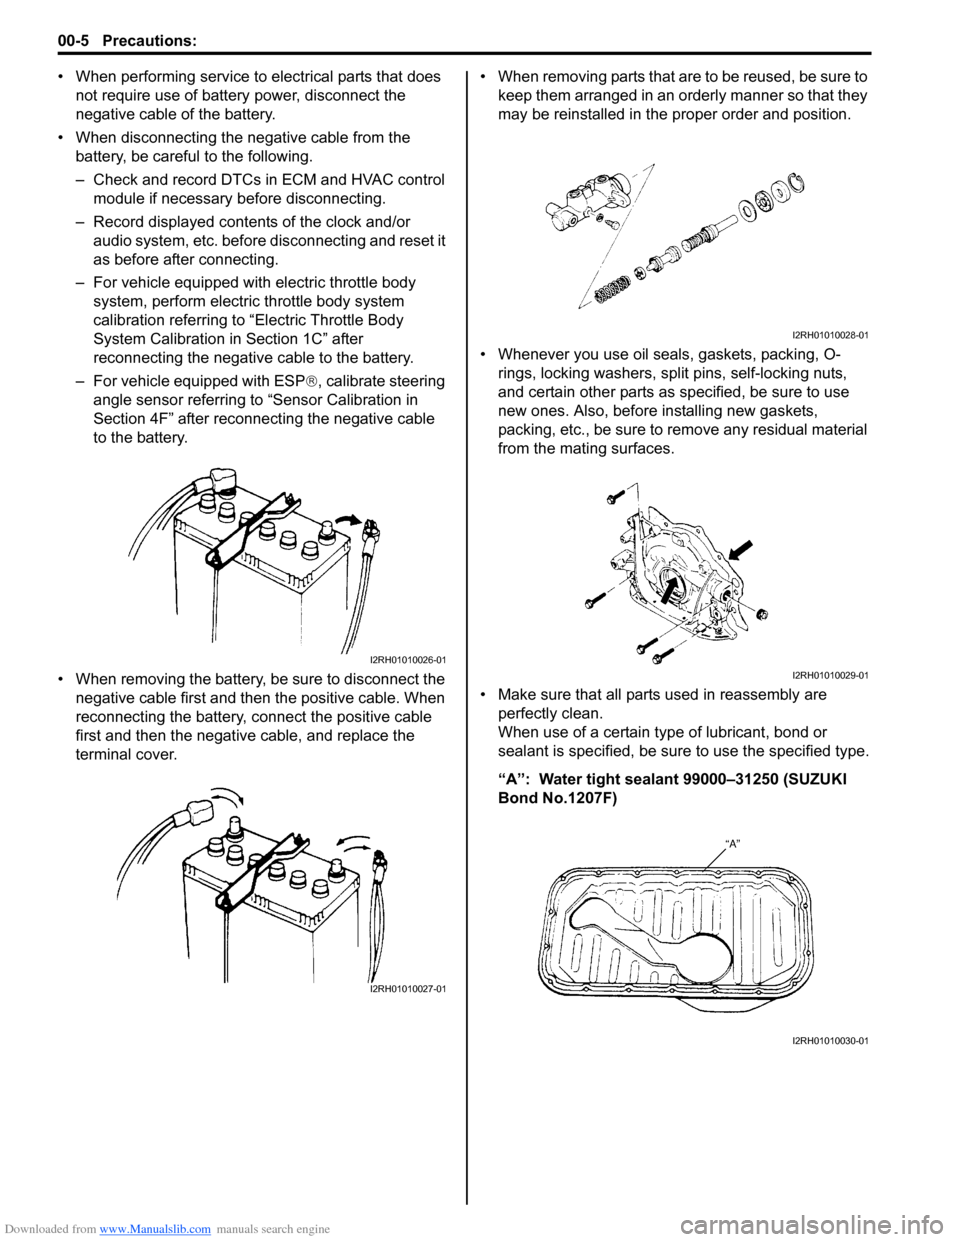 SUZUKI SWIFT 2007 2.G Service Workshop Manual Downloaded from www.Manualslib.com manuals search engine 00-5 Precautions: 
• When performing service to electrical parts that does not require use of battery power, disconnect the 
negative cable o